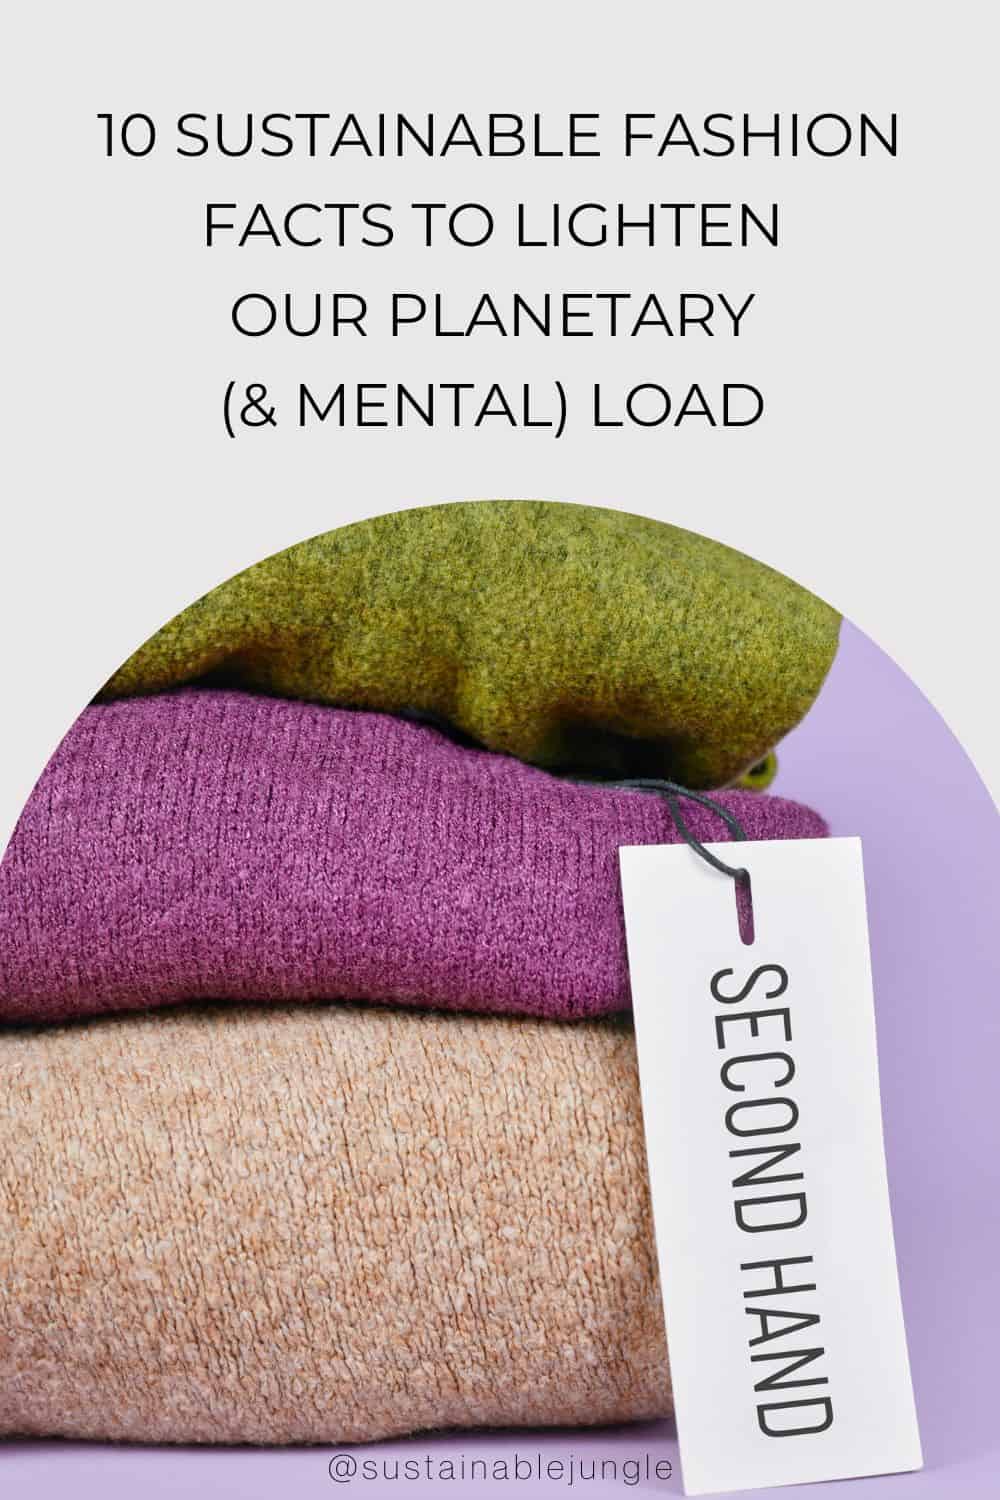 10 Sustainable Fashion Facts To Lighten our Planetary (& Mental) Load Image by firn #sustainablefashionfacts #factsaboutsustainablefashion #sustainablefashionfunfacts #sustainablefashionstatistics #ethicalfashionfacts #sustainablejungle